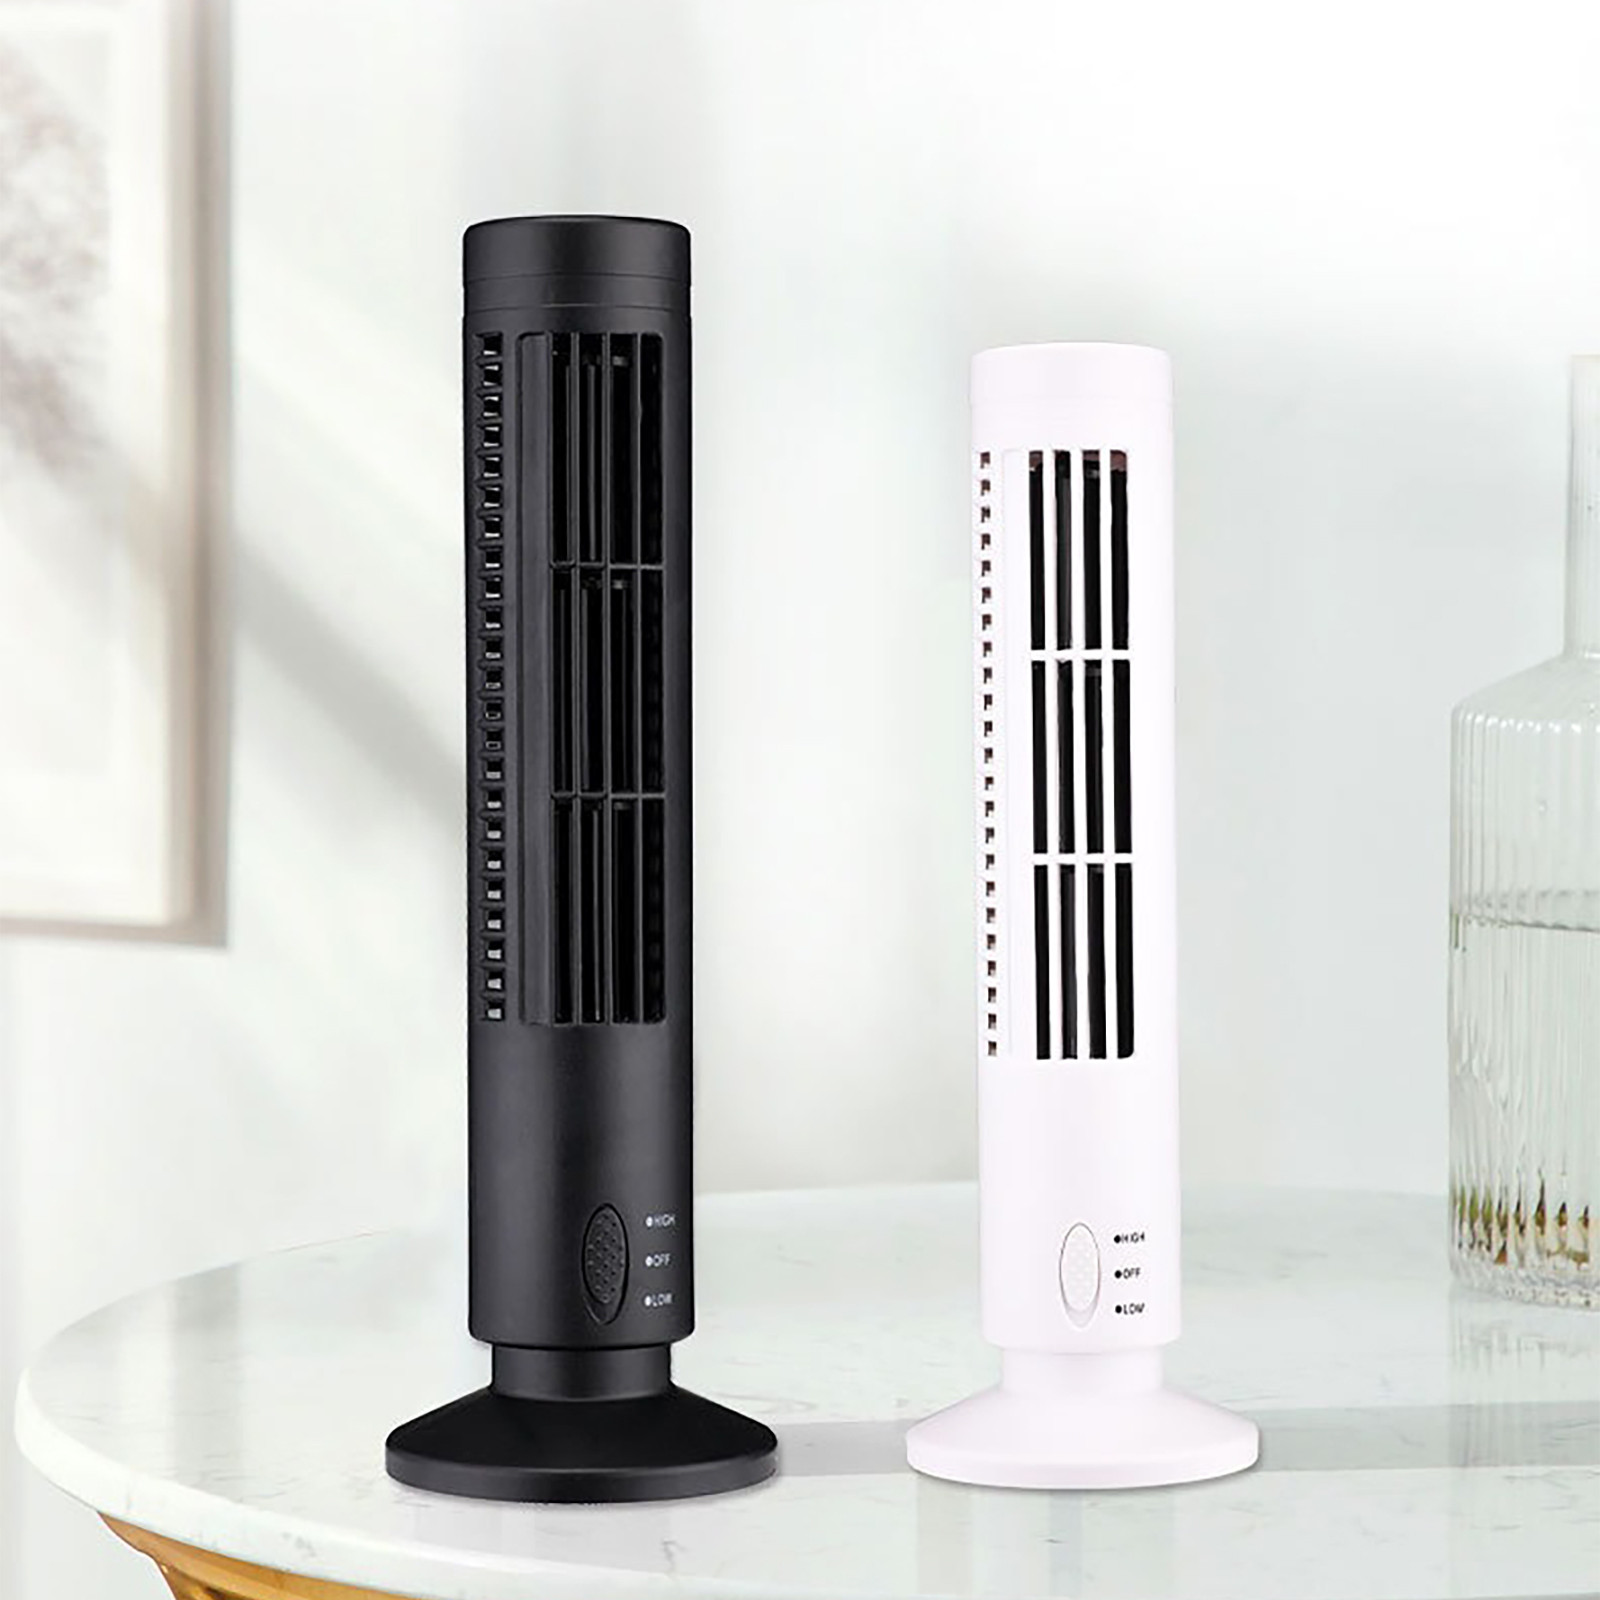 Wovilon Tower Fan for Bedroom, 24ft/s Velocity Quiet Cooling Fan, 90° Oscillating Fans for Indoors, Table Fan, Bladeless Fan, Standing Floor Fans, White - image 3 of 6